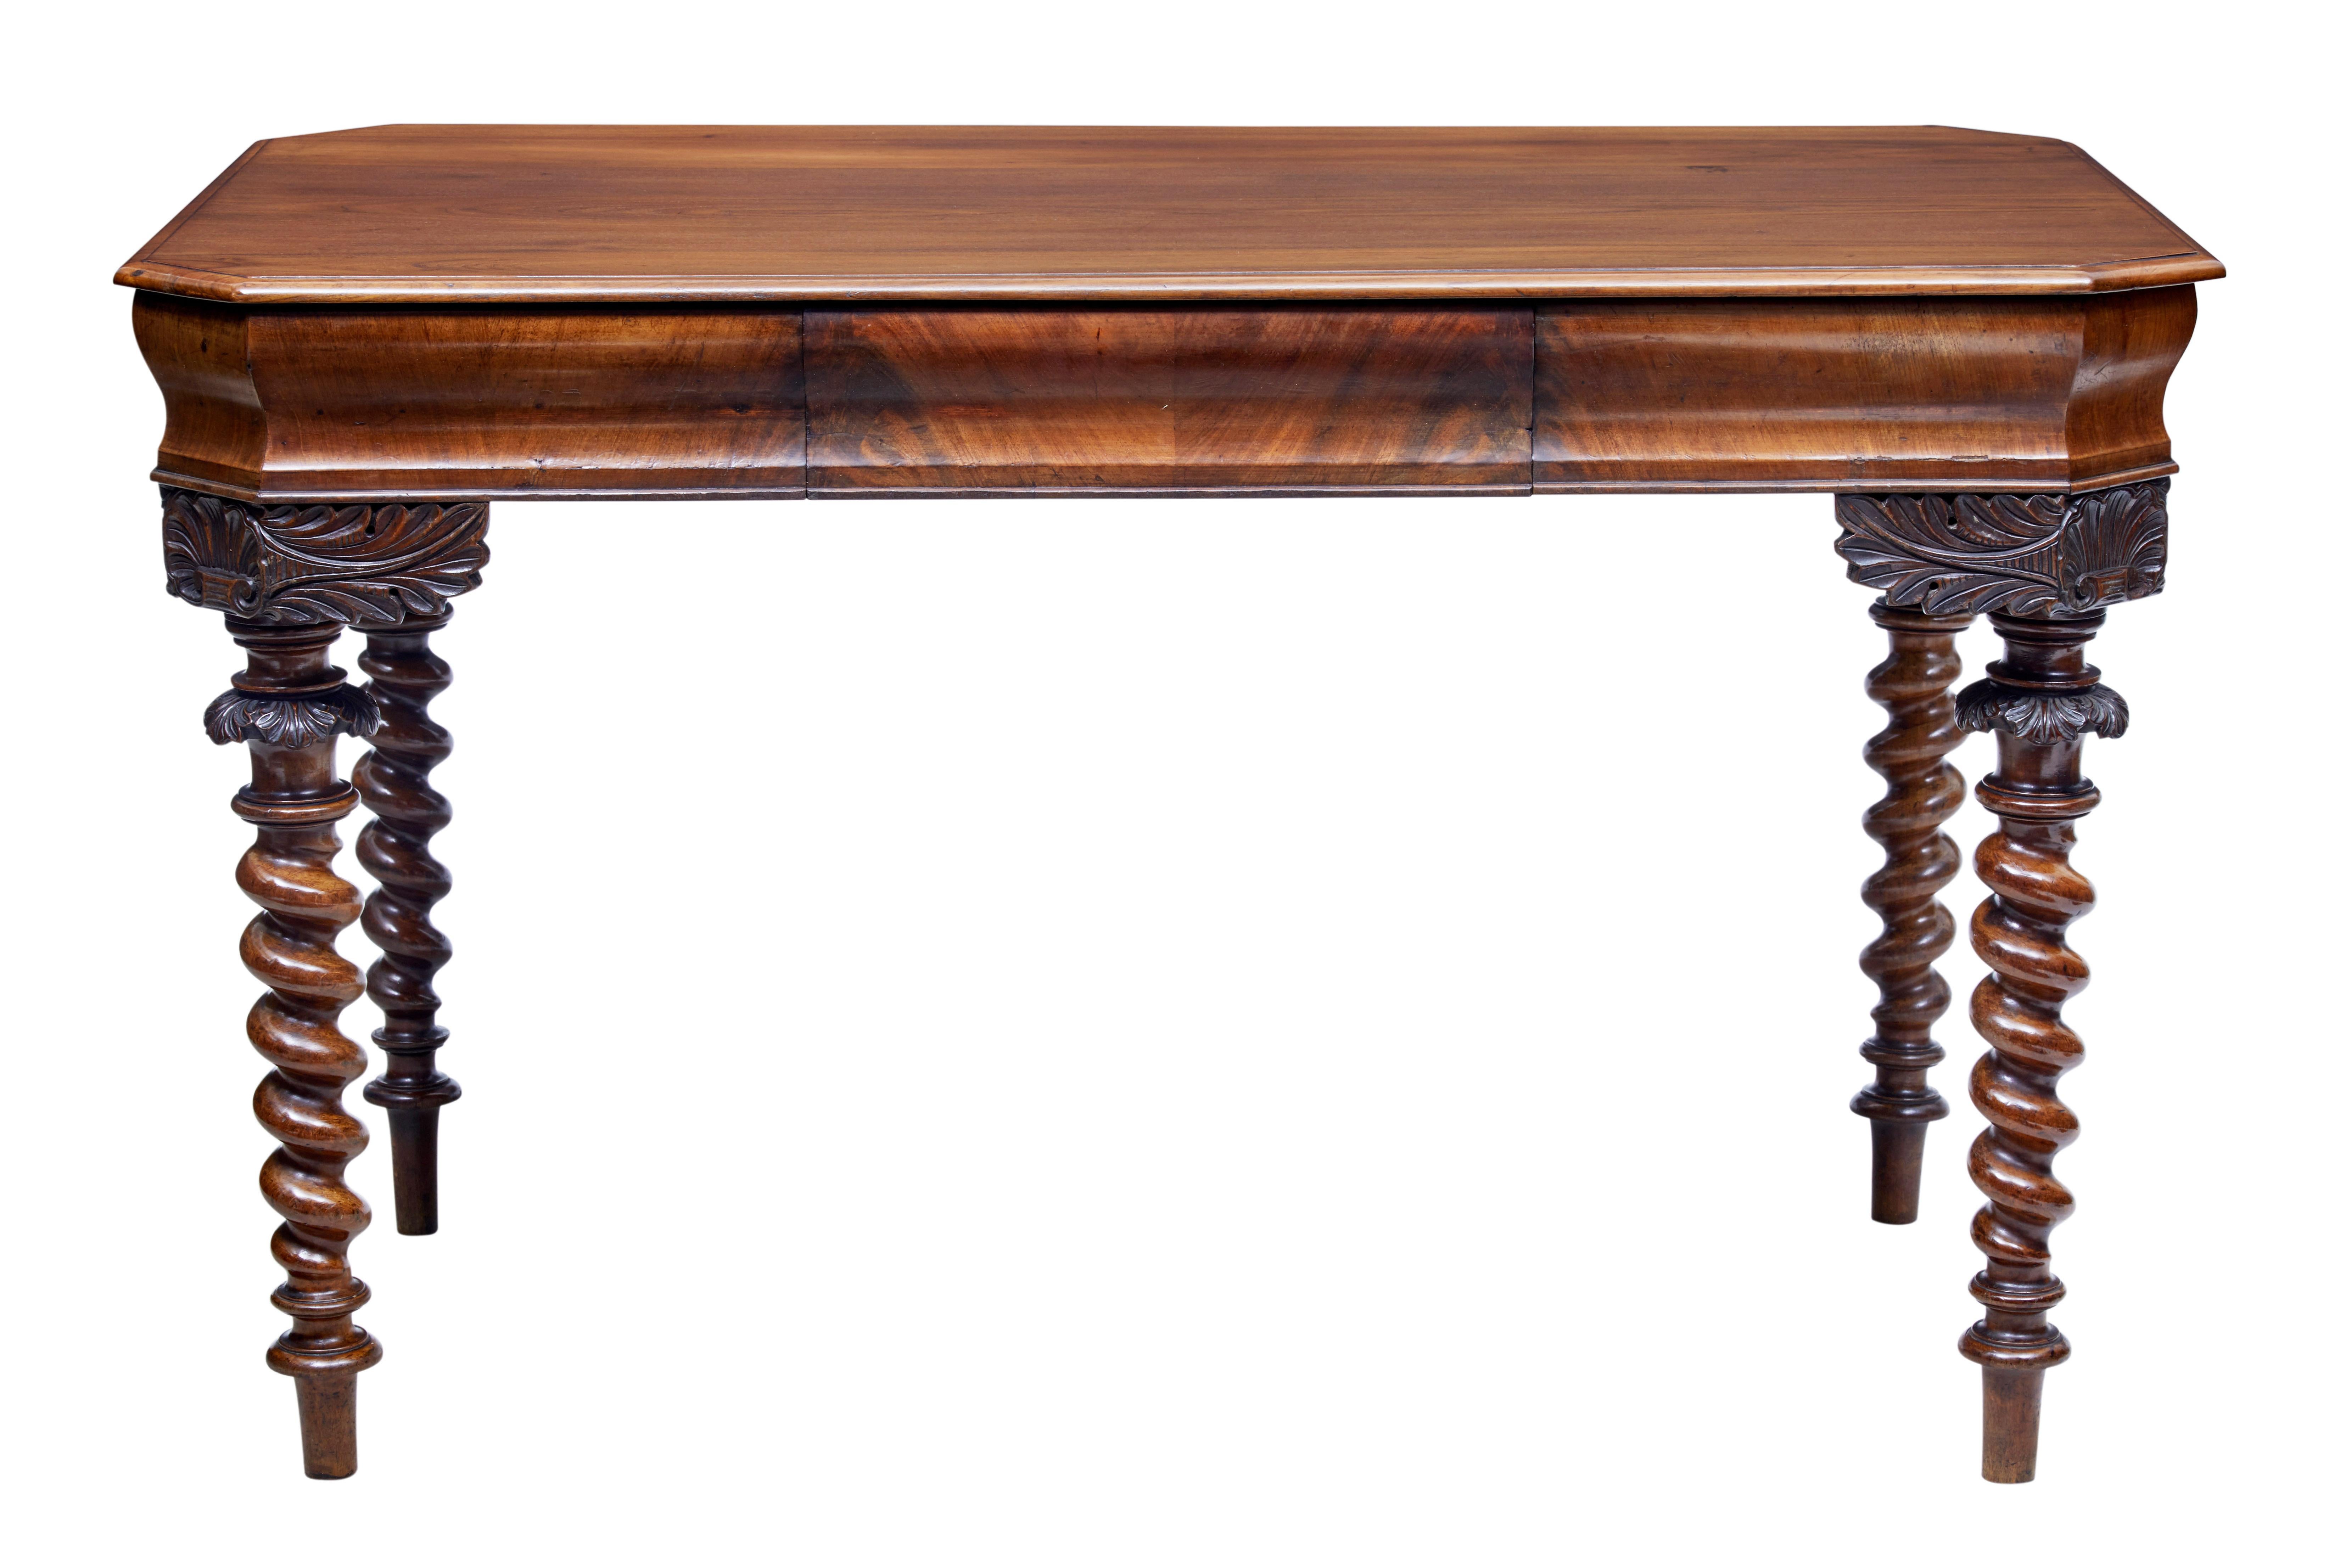 Mid-19th century Christian VIII Danish mahogany writing desk, circa 1840.

Mahogany top with flame mahogany sides. Single drawer to the front. Acanthus leaf leg mounts with barley twist legs. Due to the construction the legs on this table unscrew,